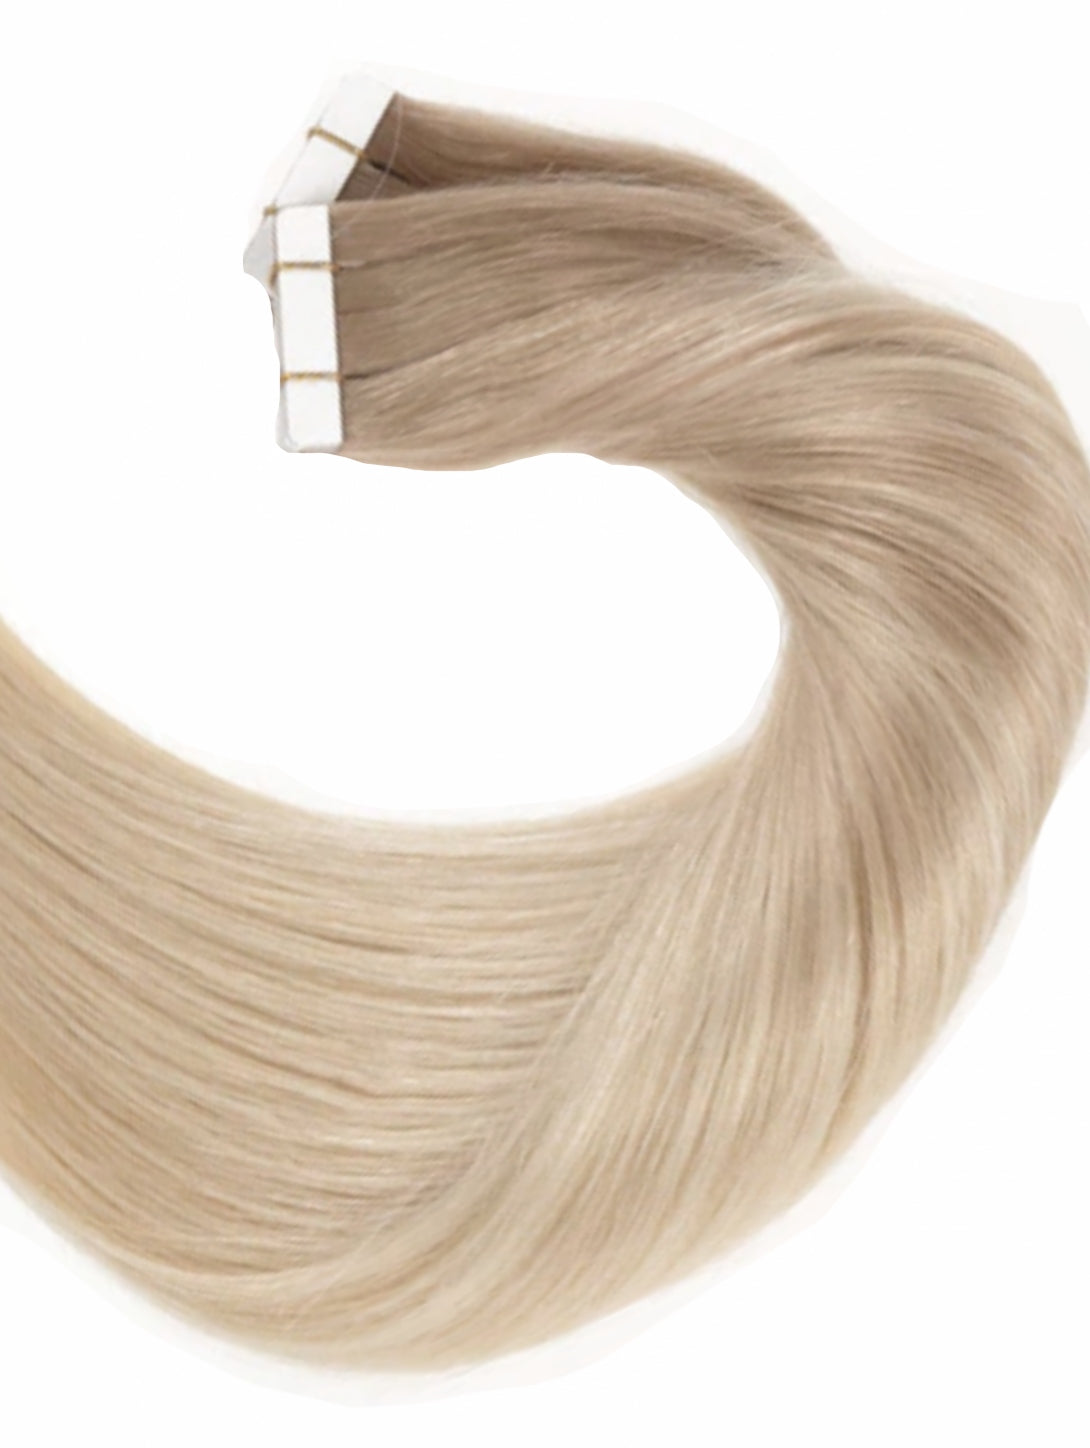 #14/613 ROOT STRETCH BALAYAGE DARK BLONDE PREMIUM REMY TAPE HAIR EXTENSIONS 